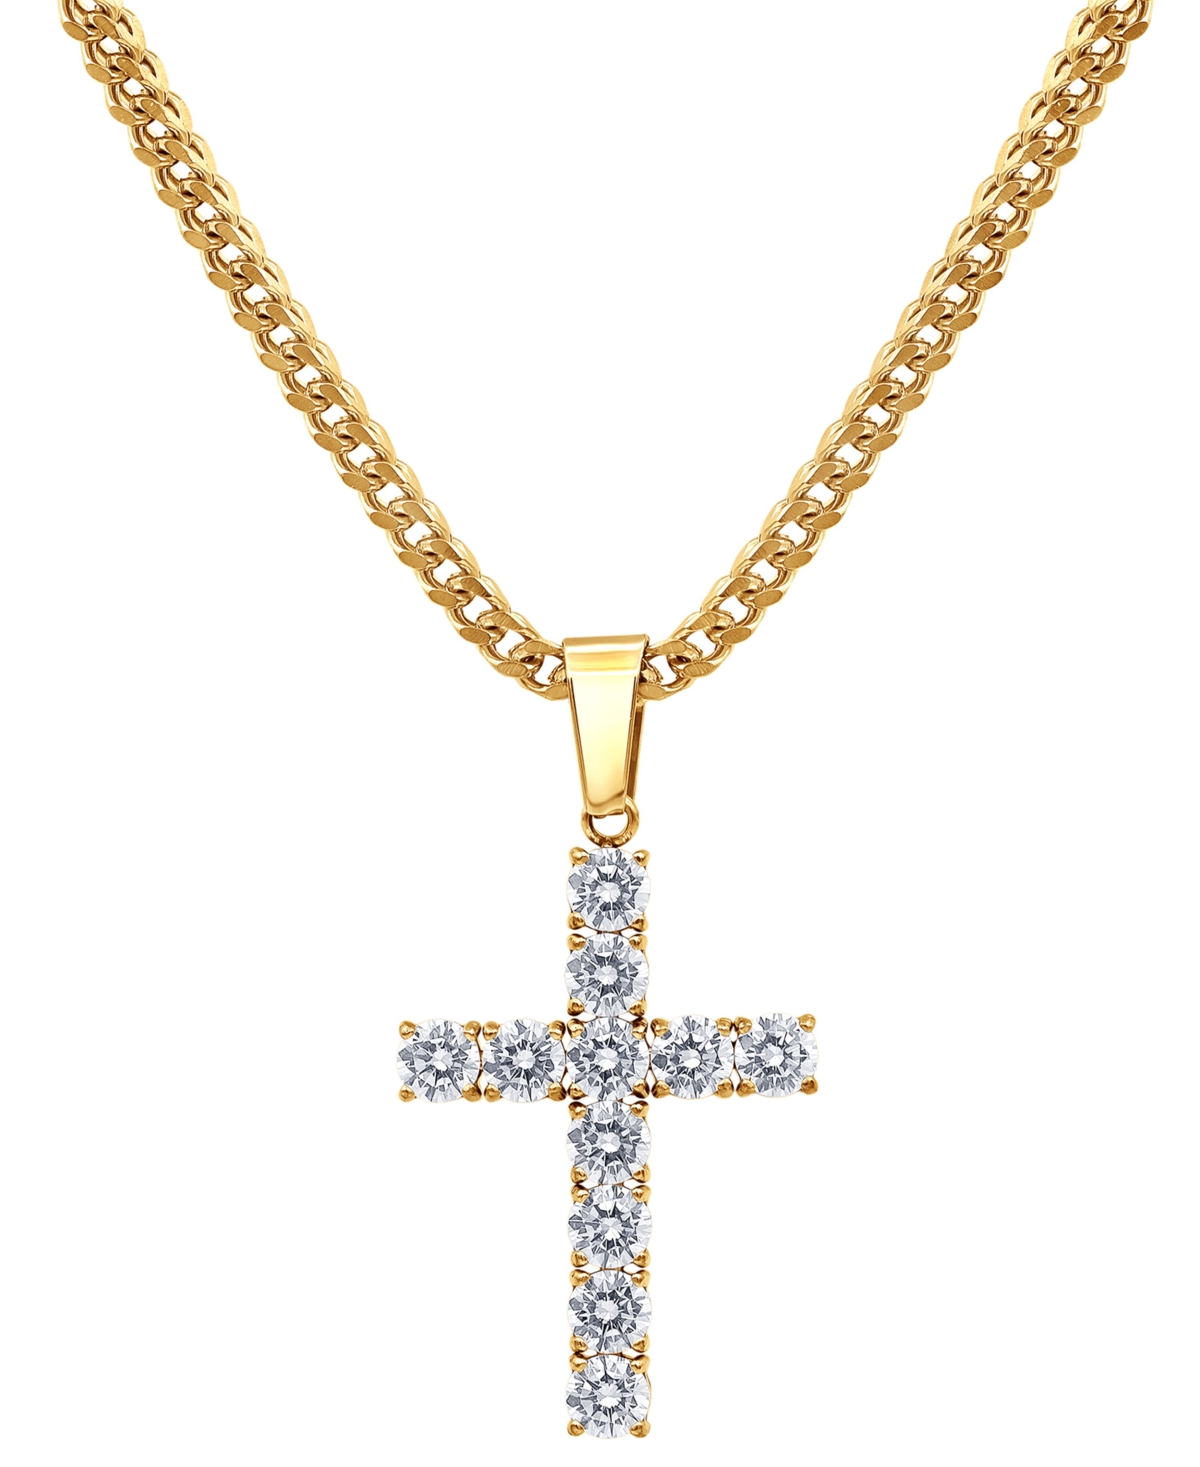 Men's Cubic Zirconia Cross 24" Pendant Necklace in Black-Ion Plated Stainless Steel - Gold-Tone